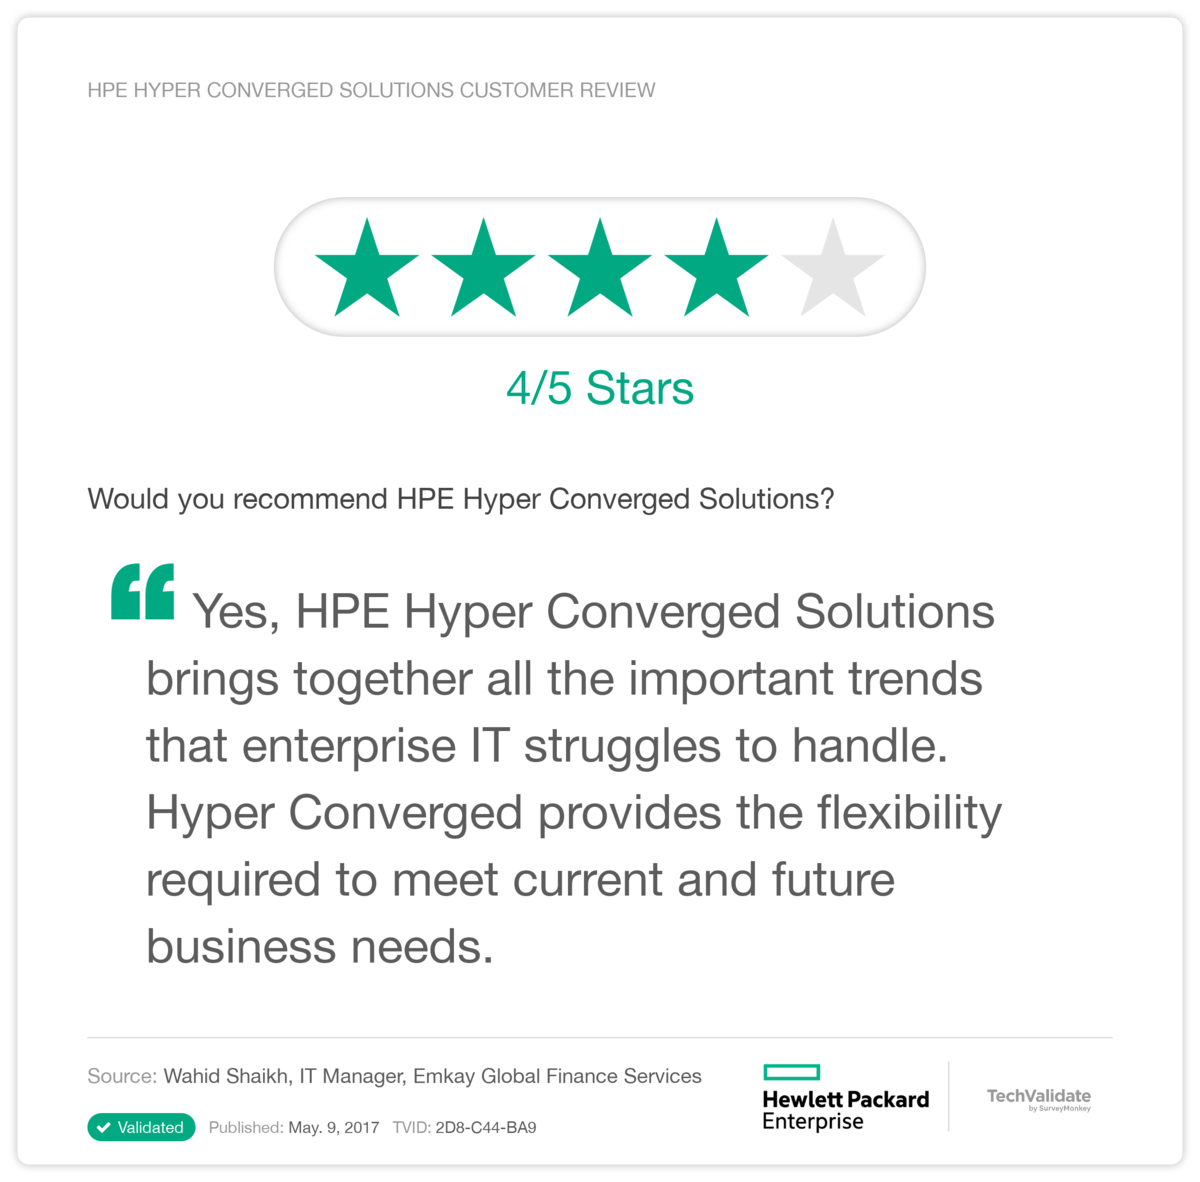 HPE Hyper Converged Solutions Customer Review